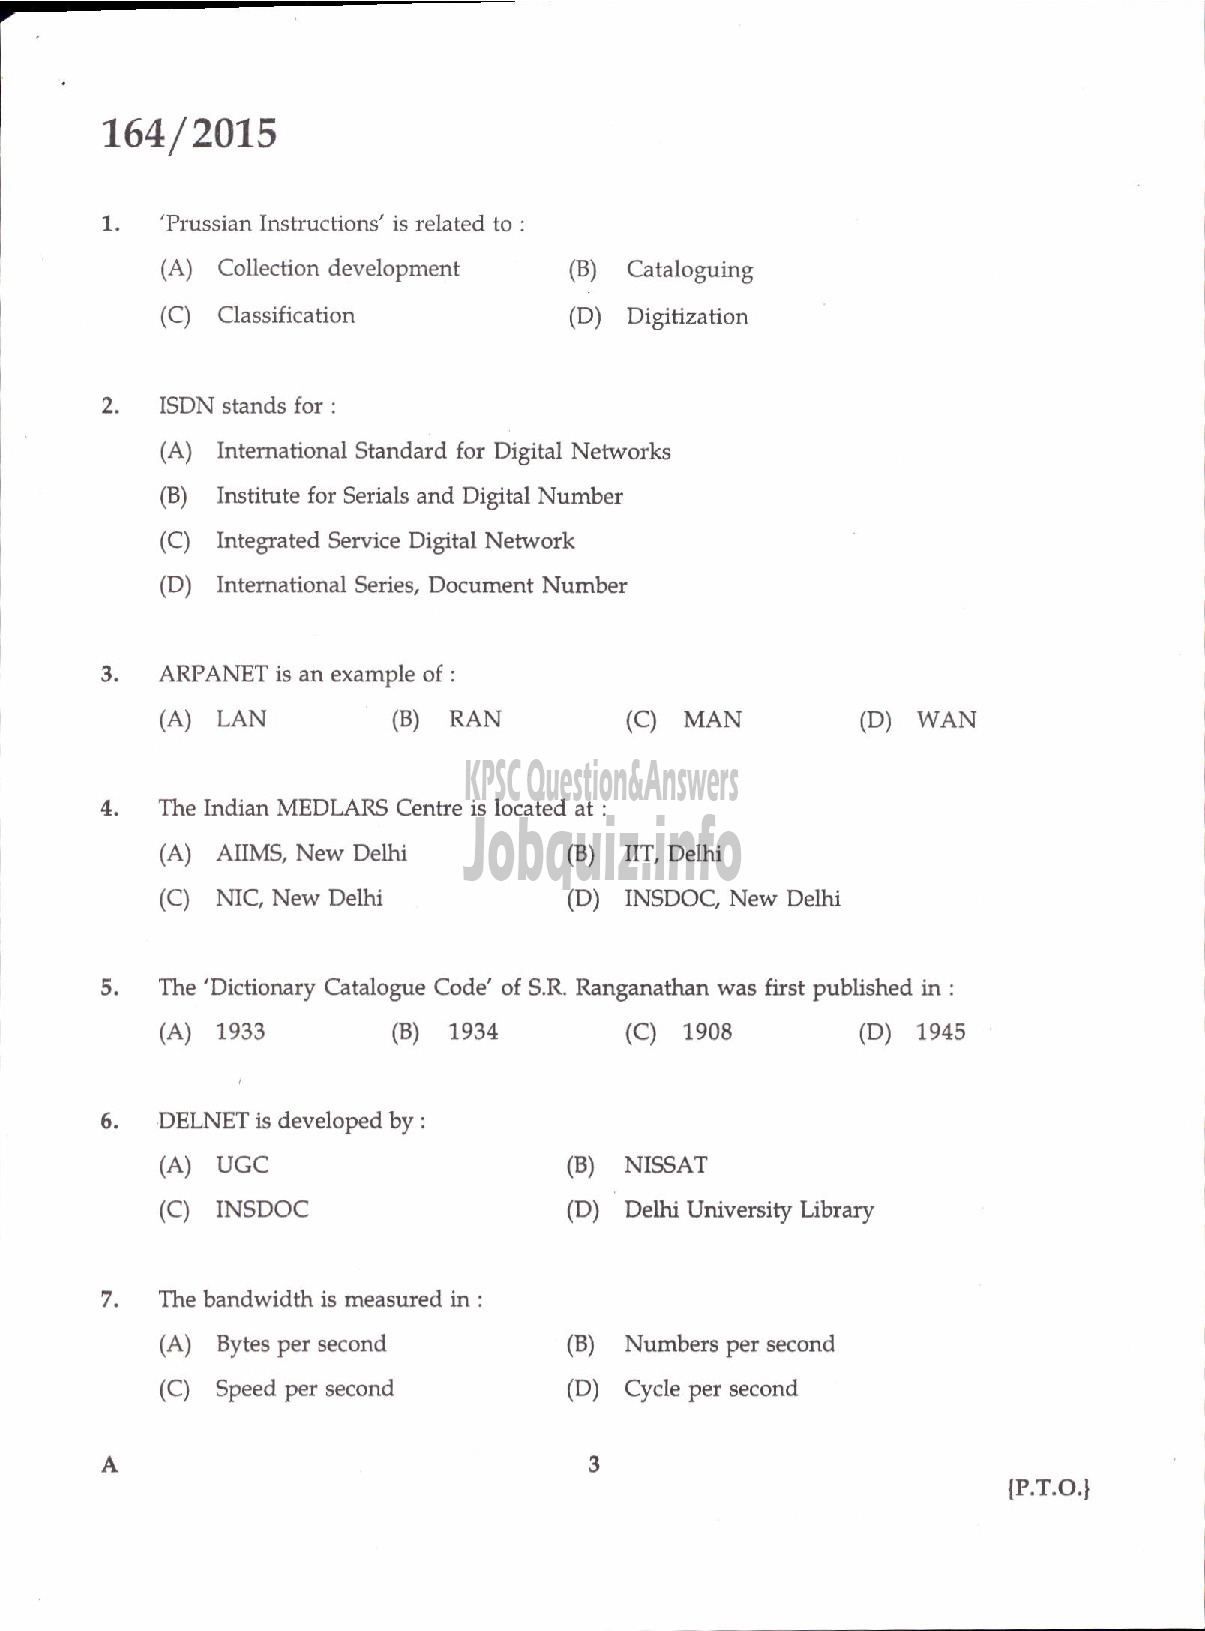 Kerala PSC Question Paper - LIBRARIAN GR III STATE CENTRAL LIBRARY-1